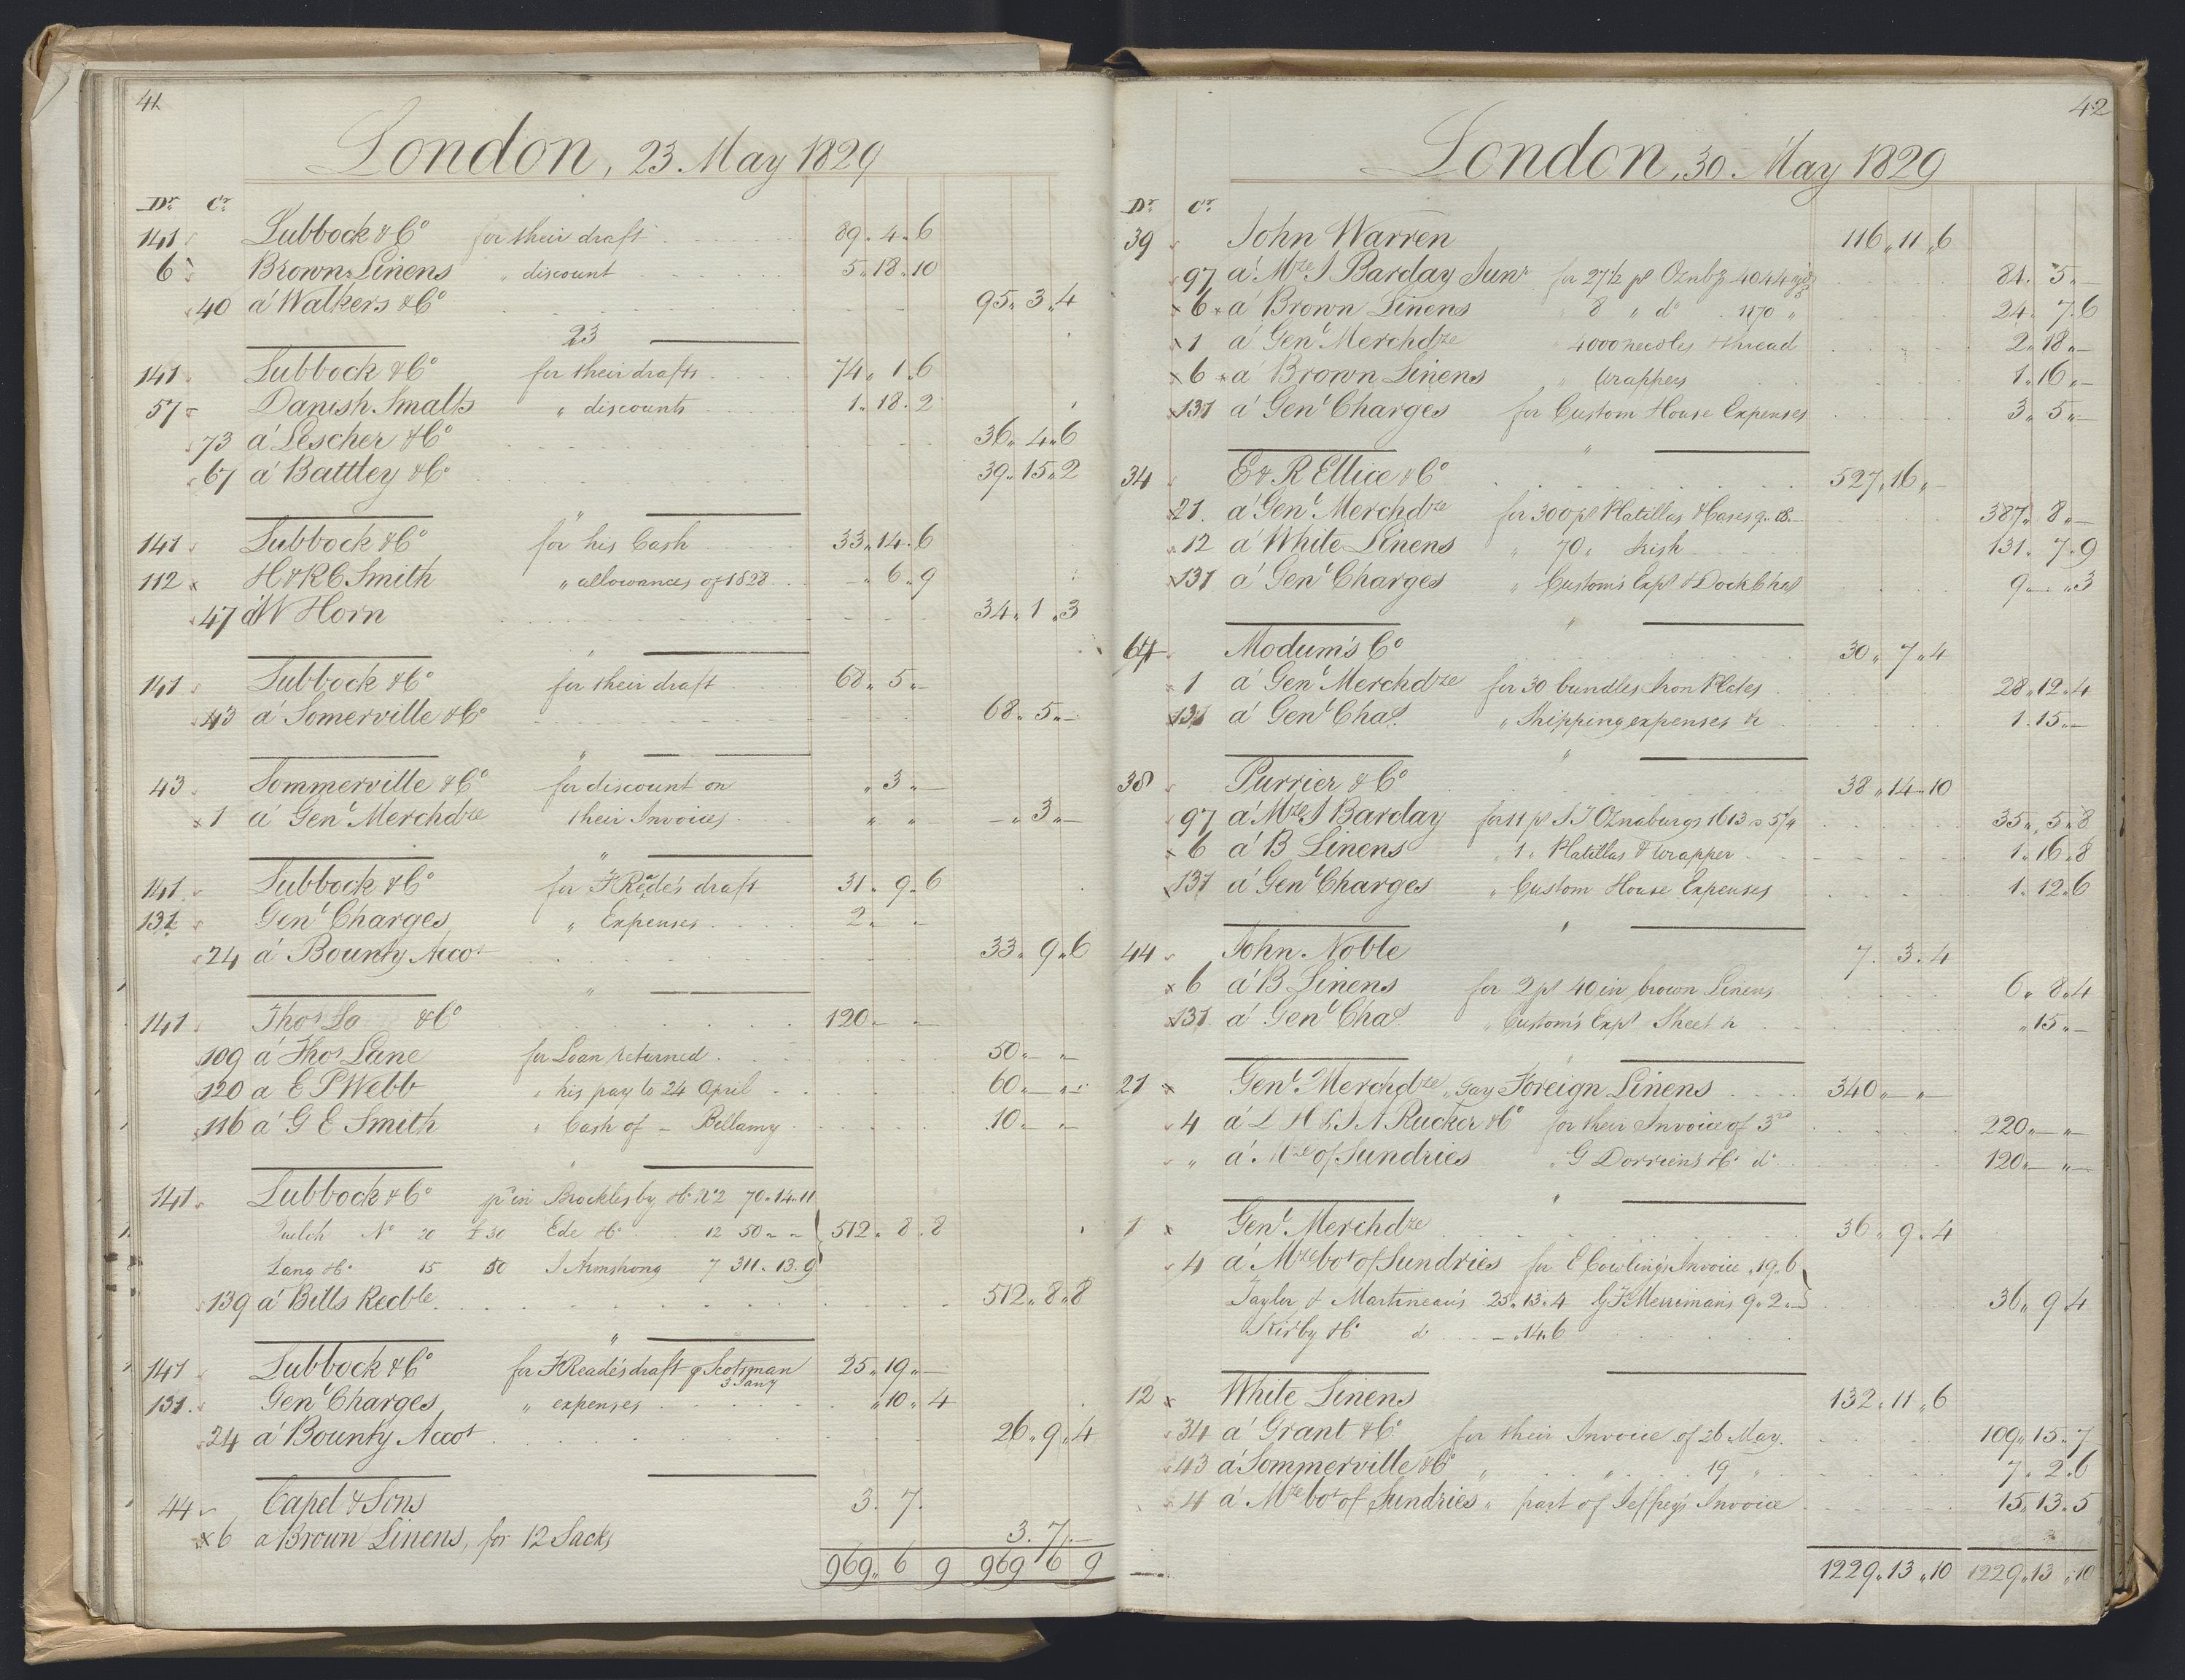 Smith, Goodhall & Reeves, RA/PA-0586/R/L0001: Dagbok (Daybook) A, 1829-1831, p. 41-42